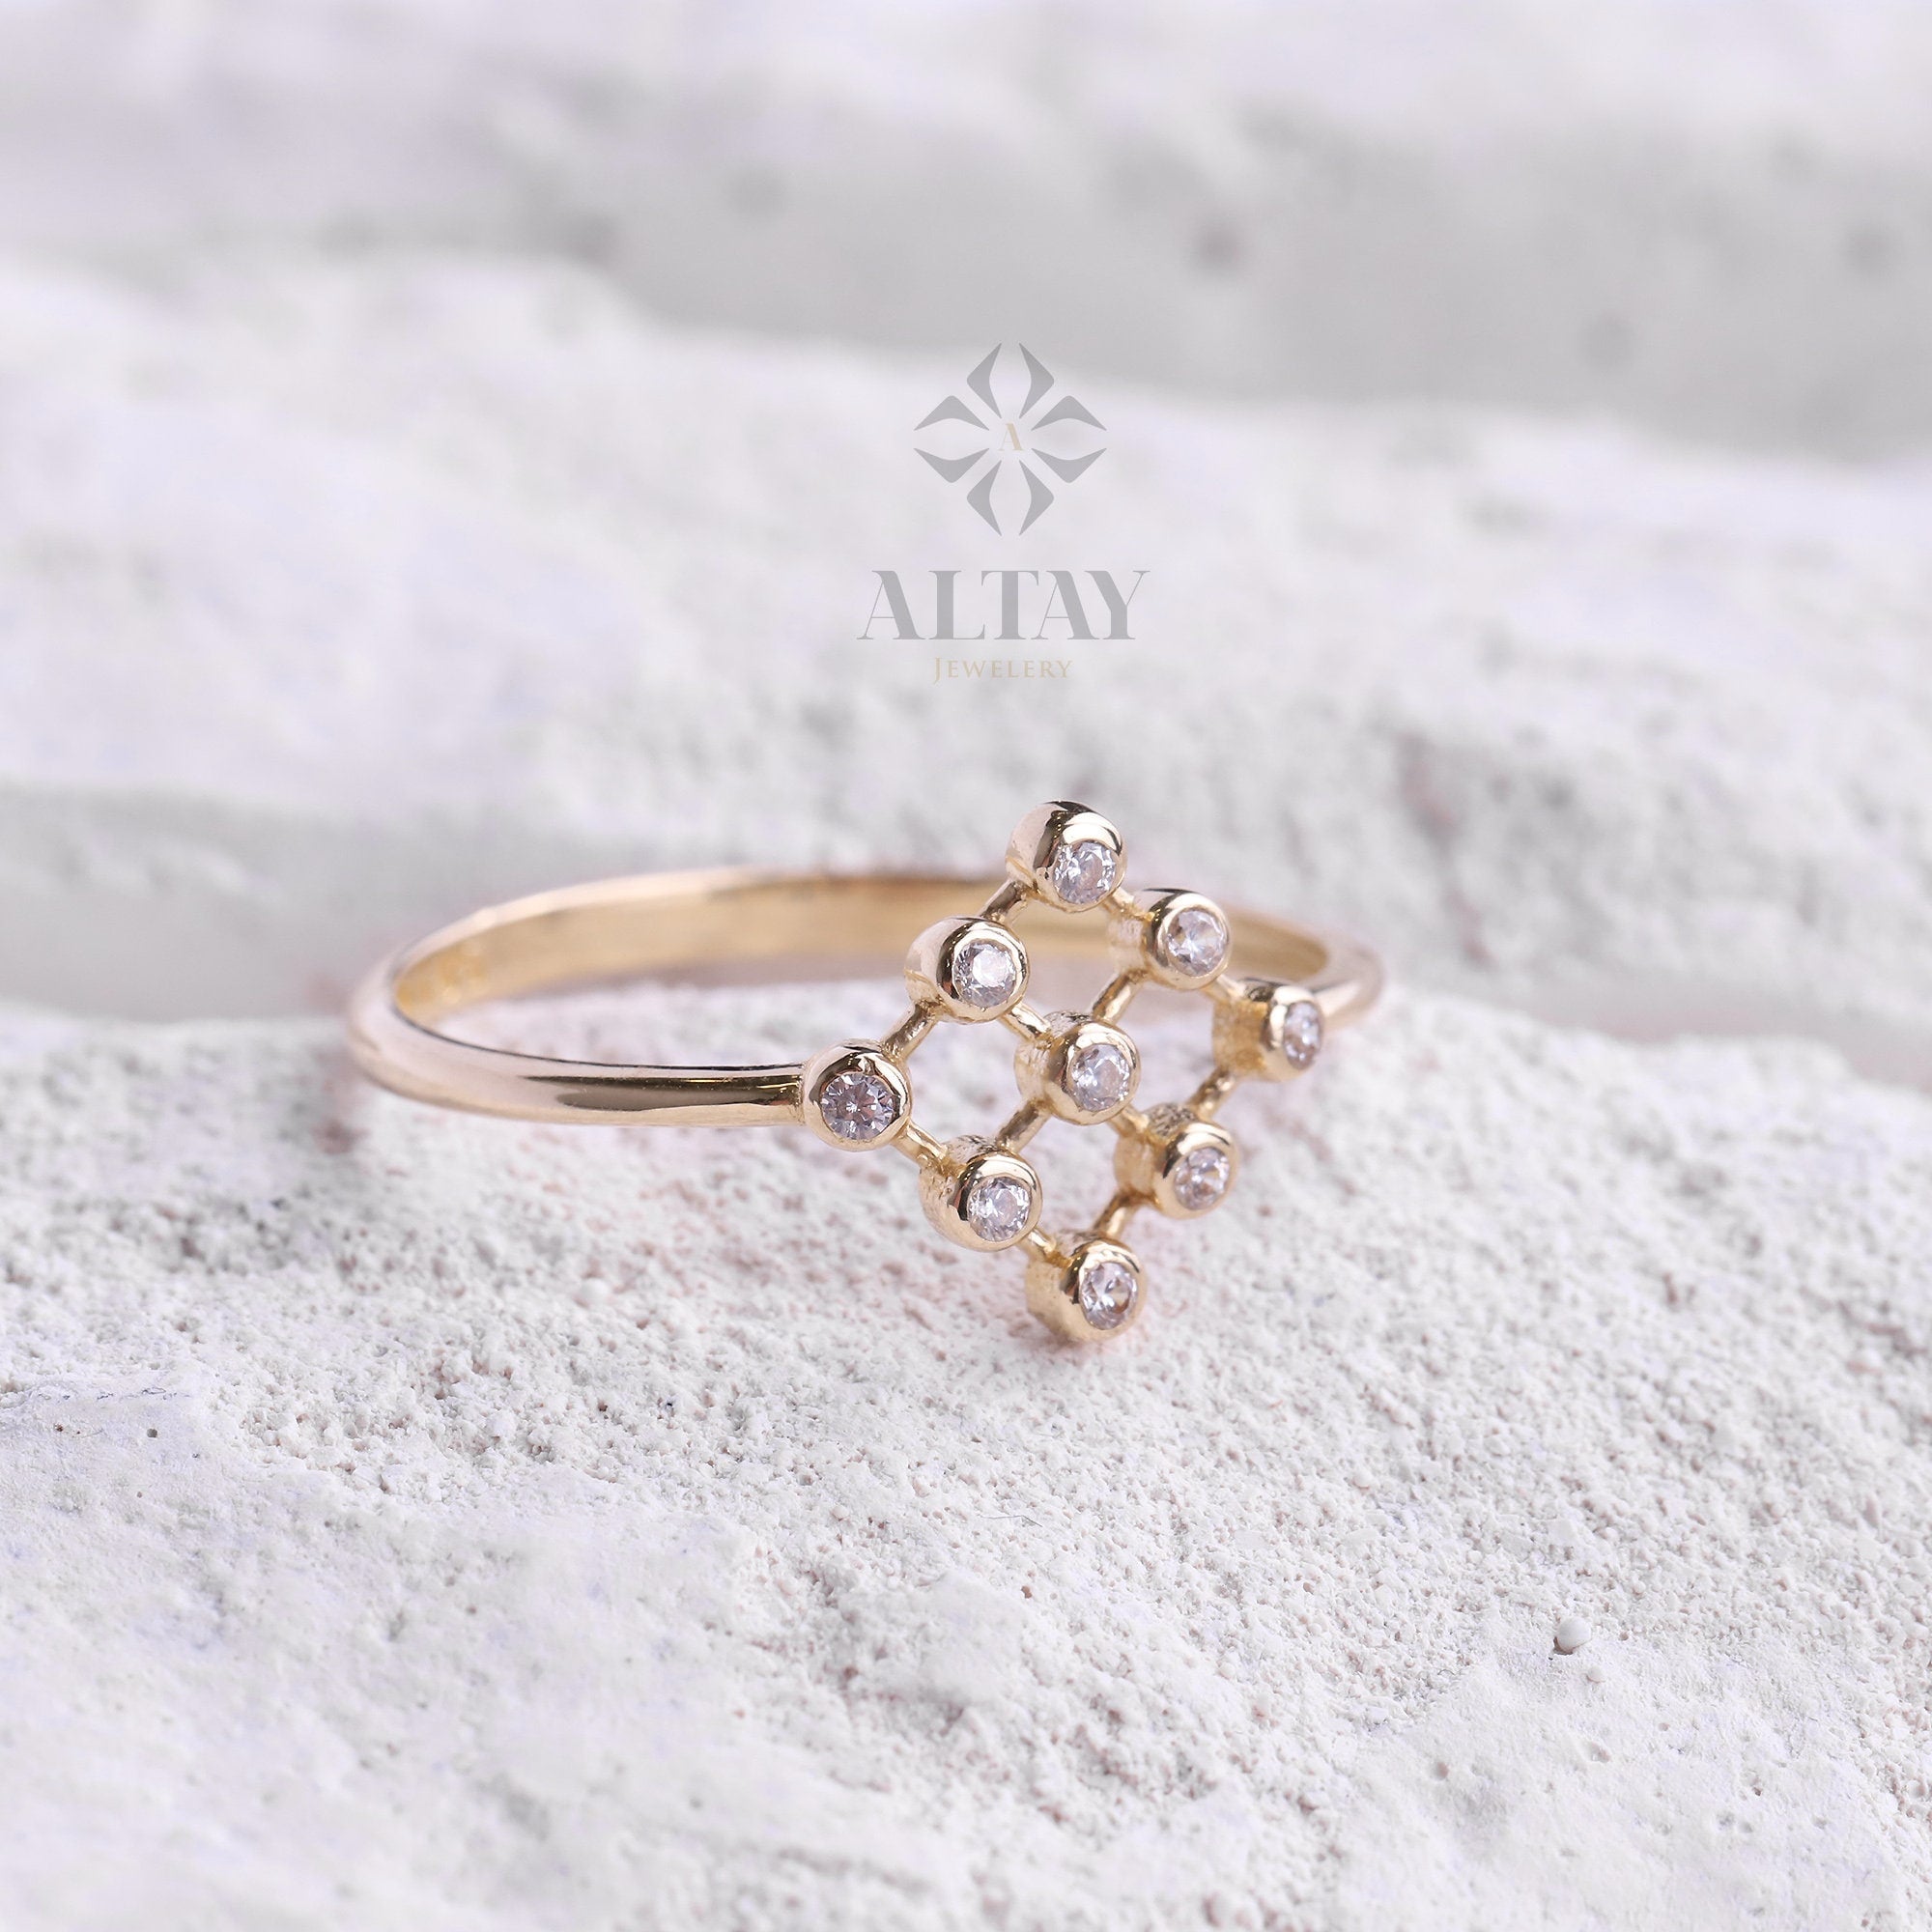 14K Gold Bezel Ring, 9 Set Cluster CZ Diamond Ring, Engagement Ring, Stacking Ring, Dainty Twist Ring, Gold Ring, Anniversary Gift For Her